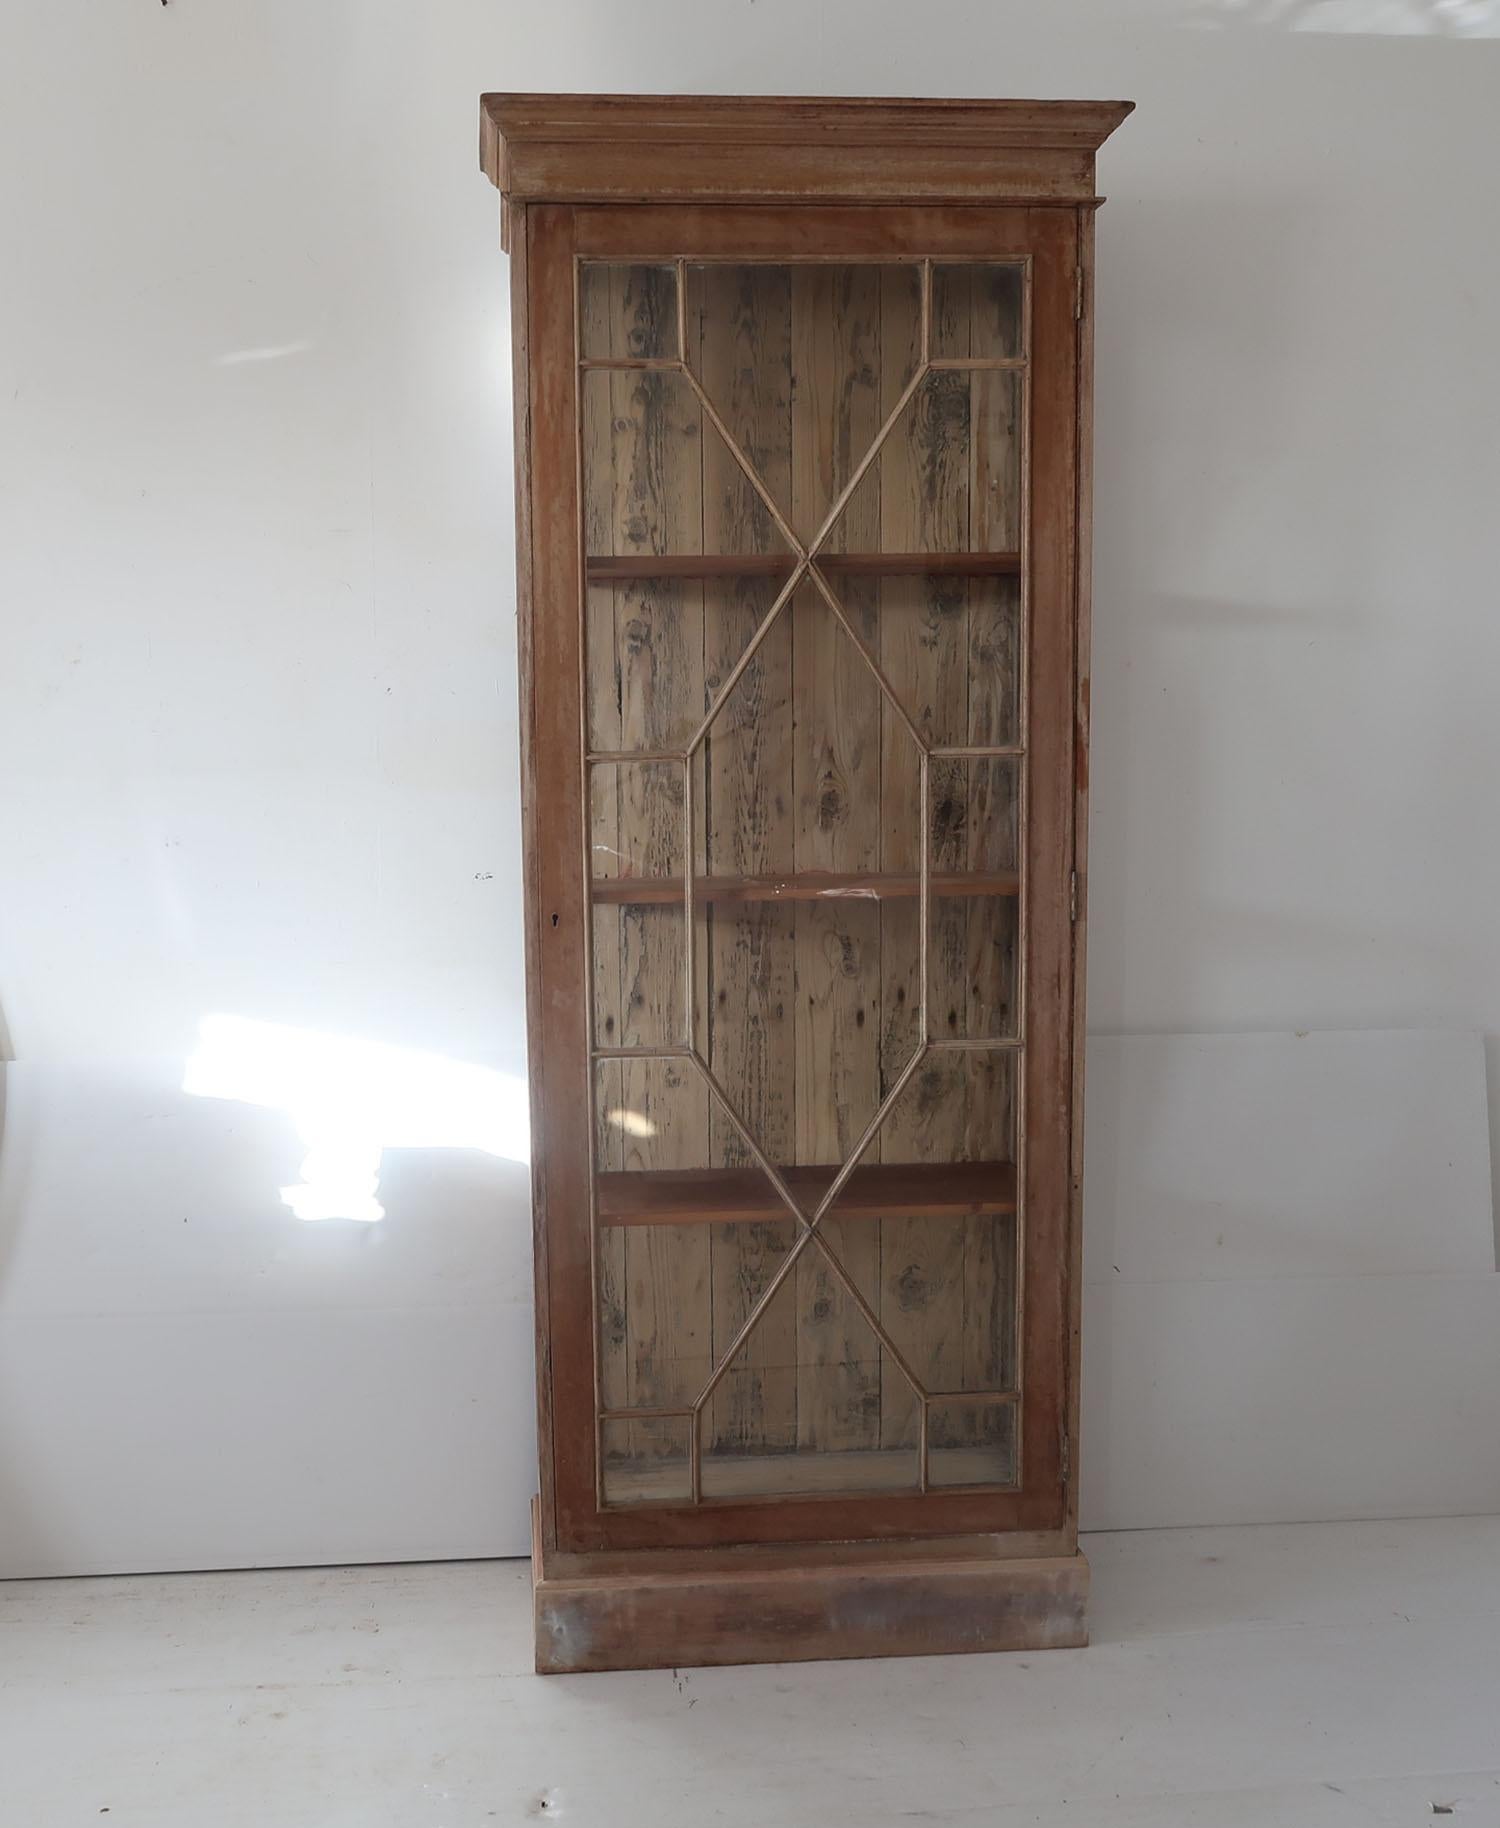 Early 20th Century Small Antique Georgian Style Bleached Mahogany Cabinet with Astragal Glazing